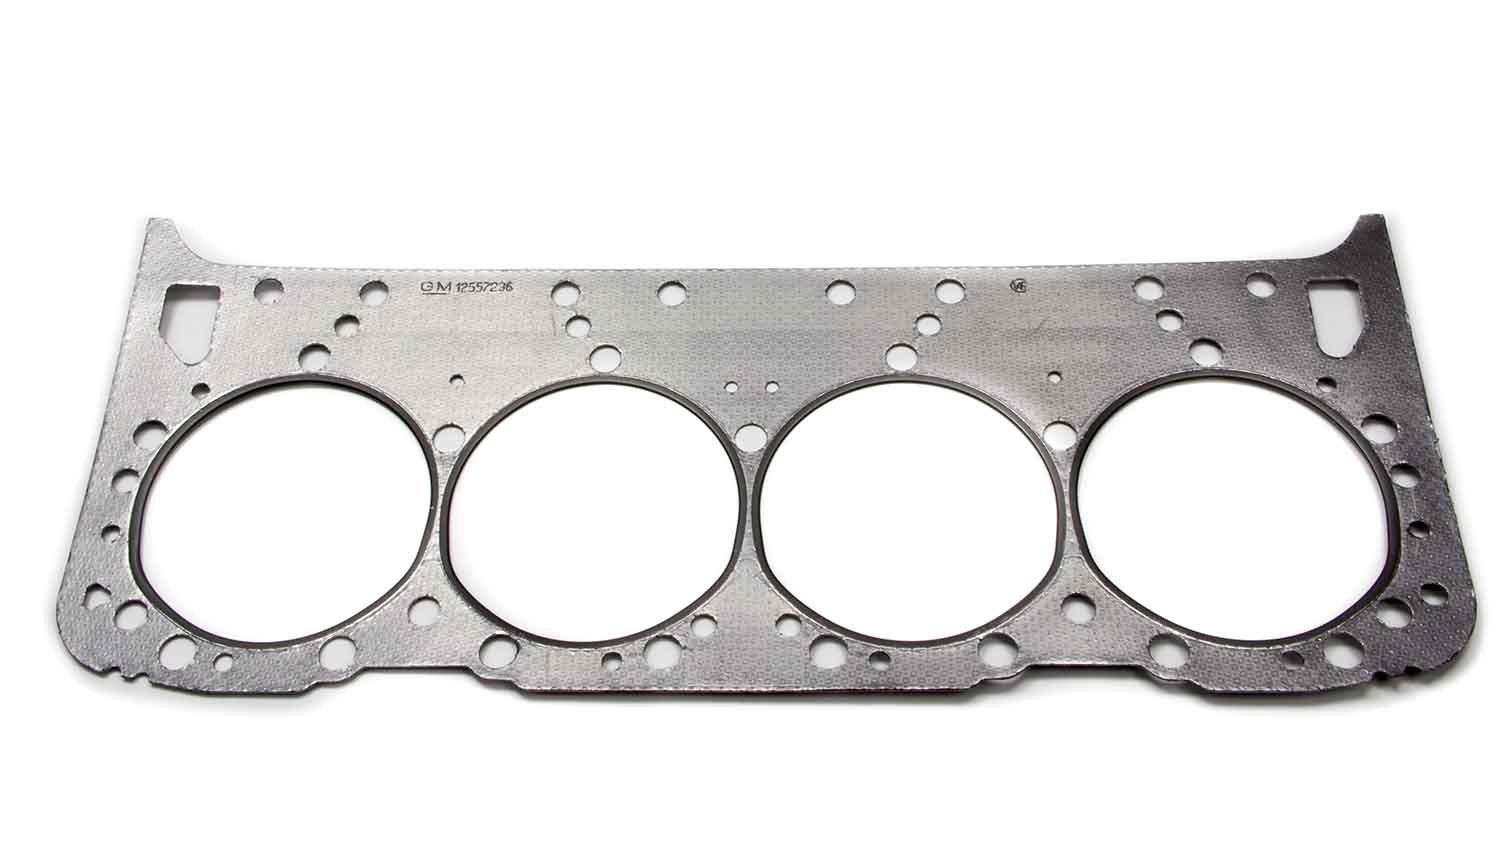 Chevrolet Performance 12557236 Cylinder Head Gasket, 4.100 in Bore, 0.051 in Compression Thickness, Steel Core Laminate, Small Block Chevy, Each